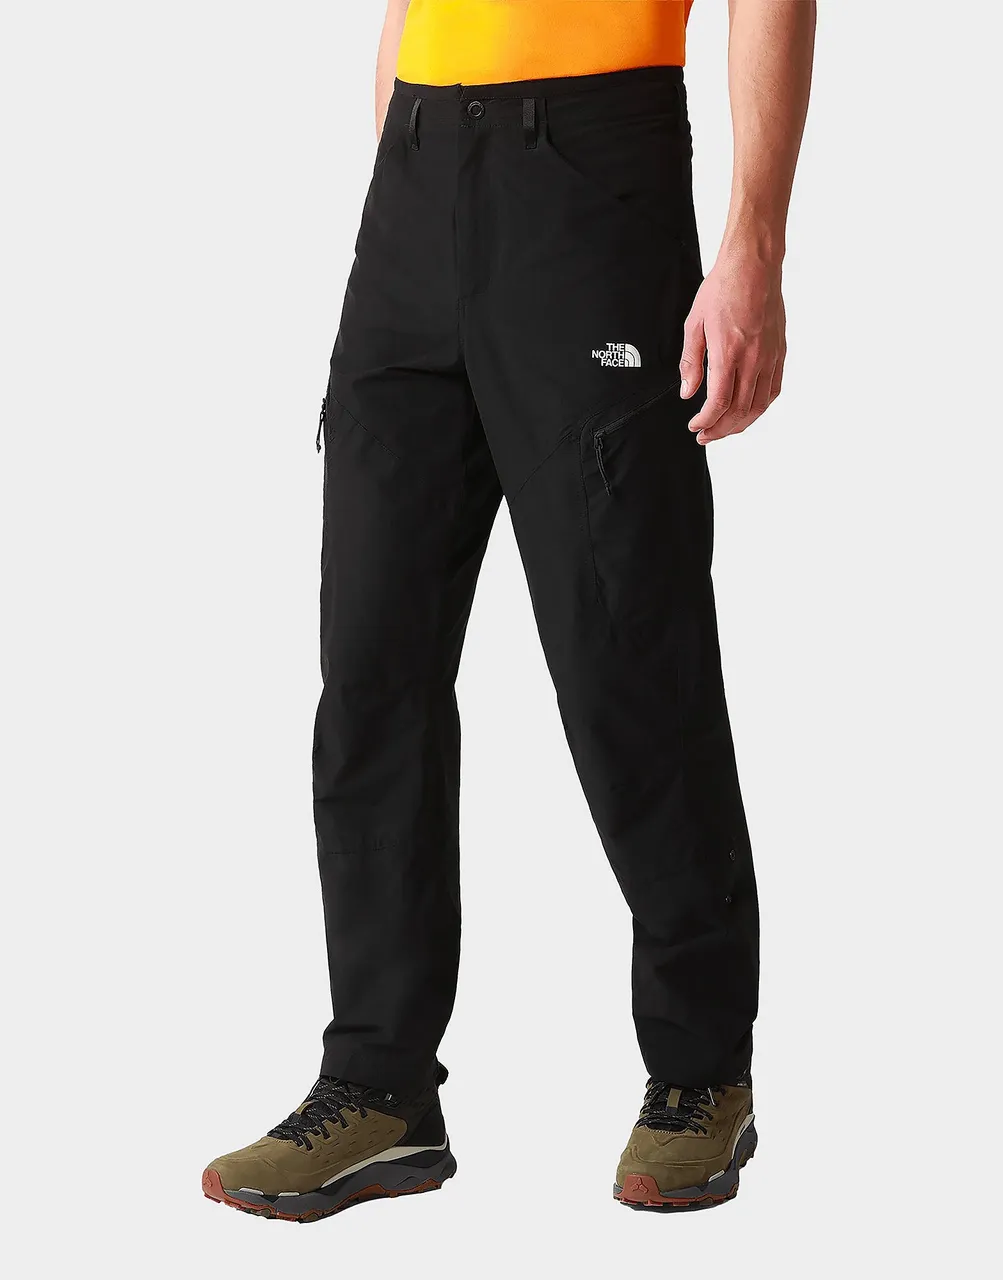 The North Face Exploration Tapered Pants - Black - Mens